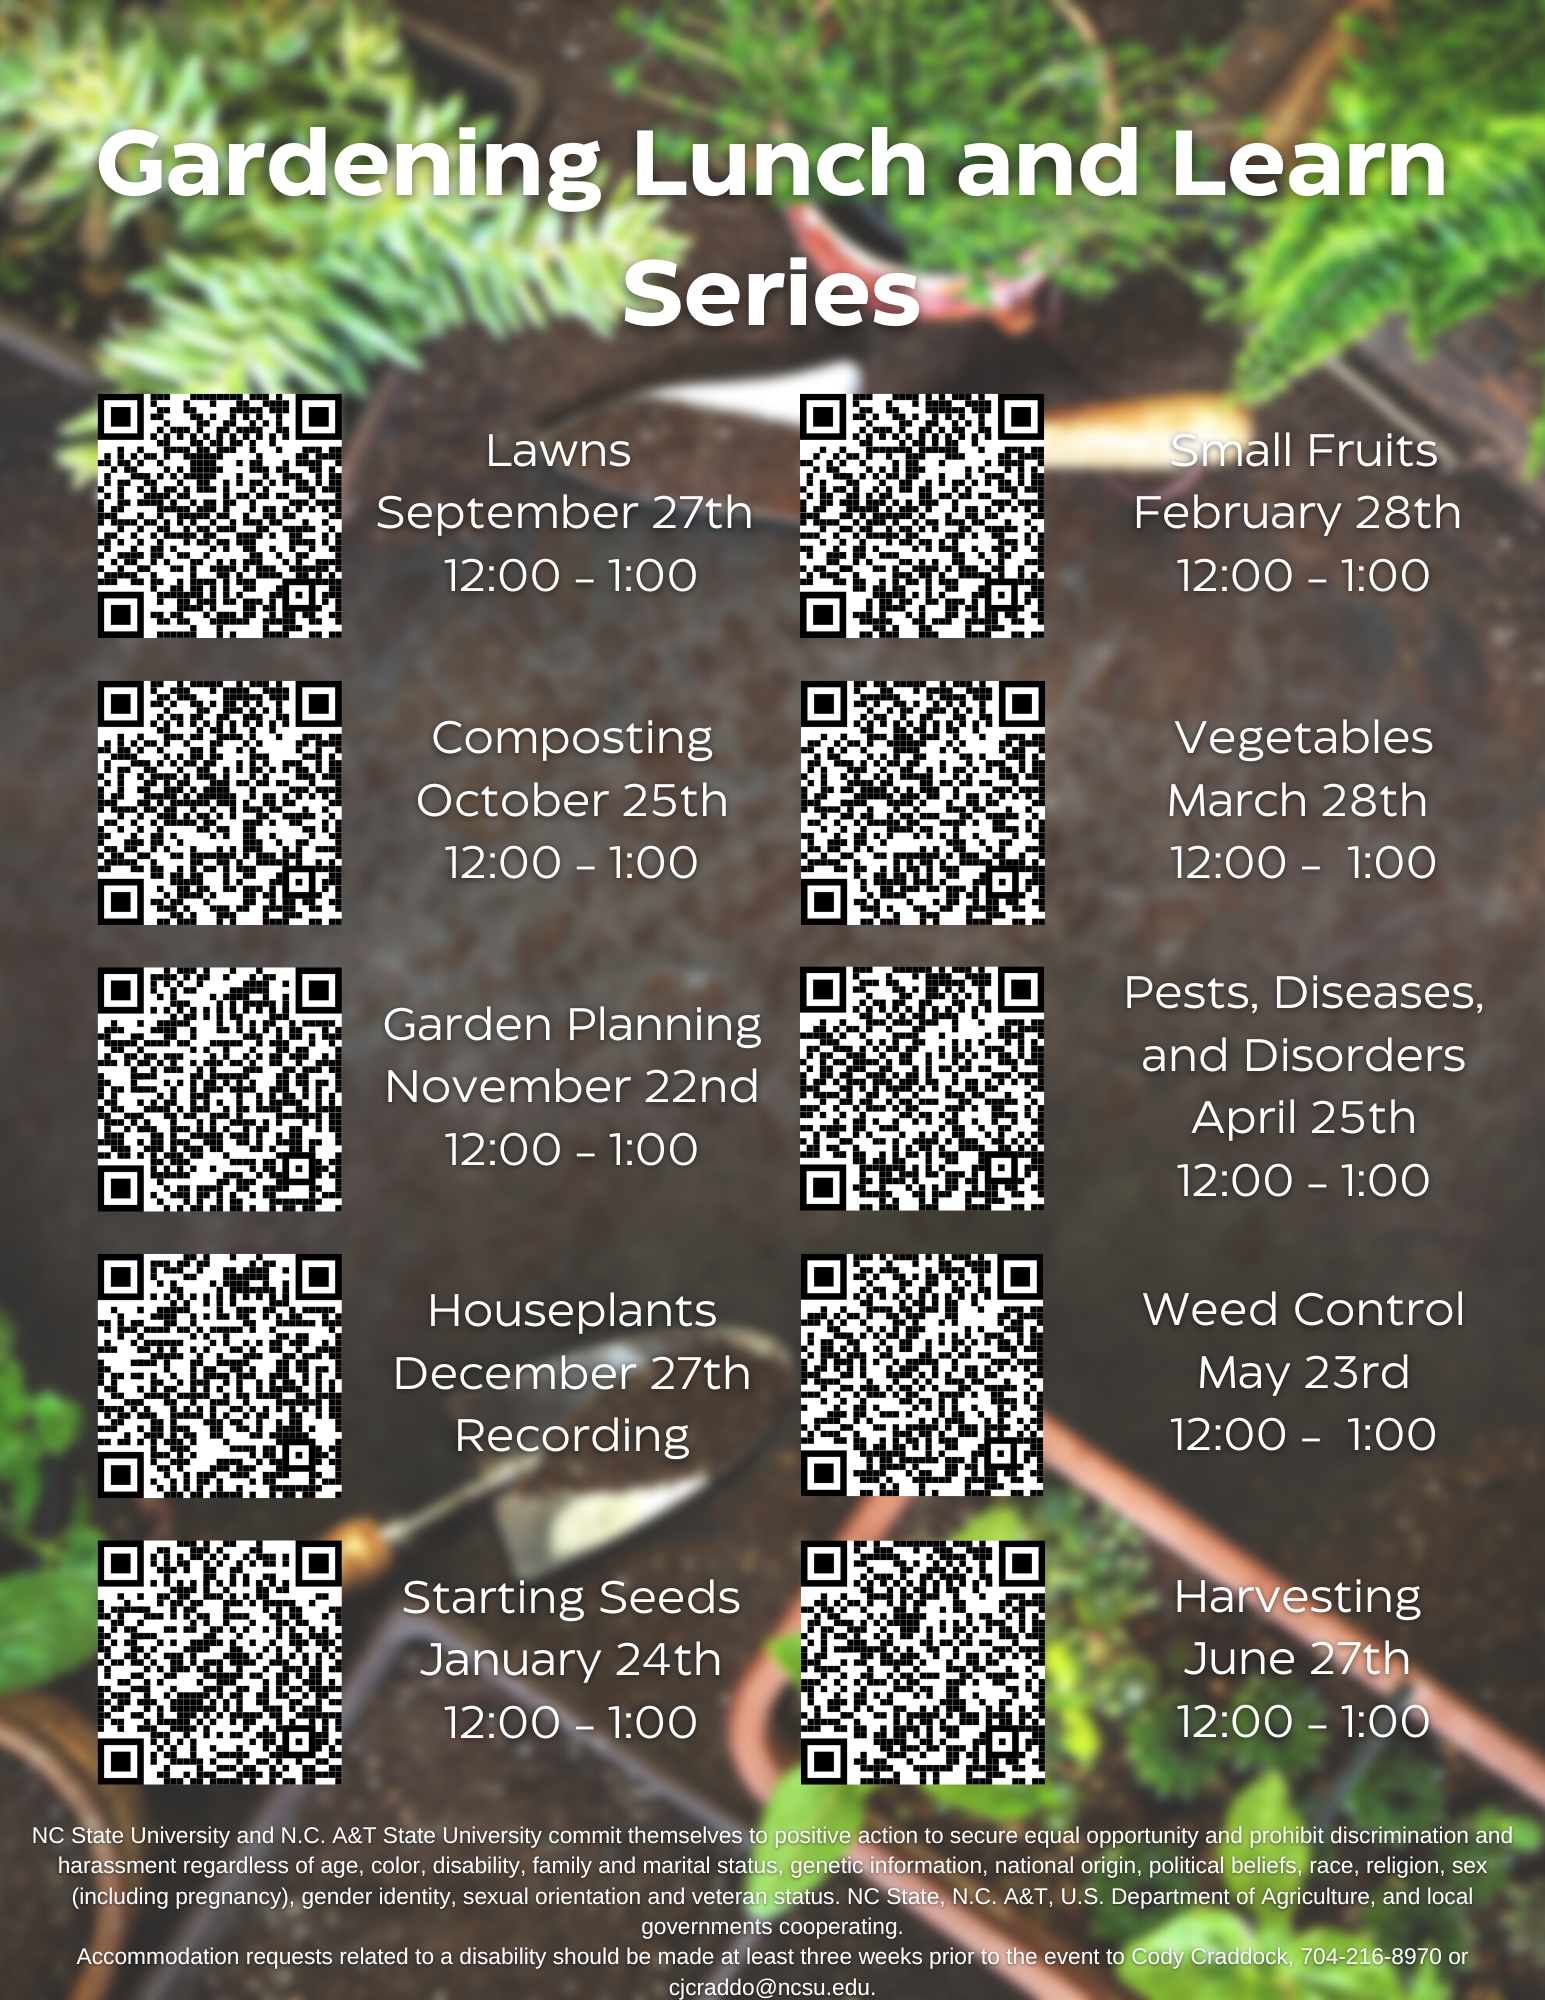 This is a picture of the QR Codes that can be used to registered for each Lunch and Learn Session.